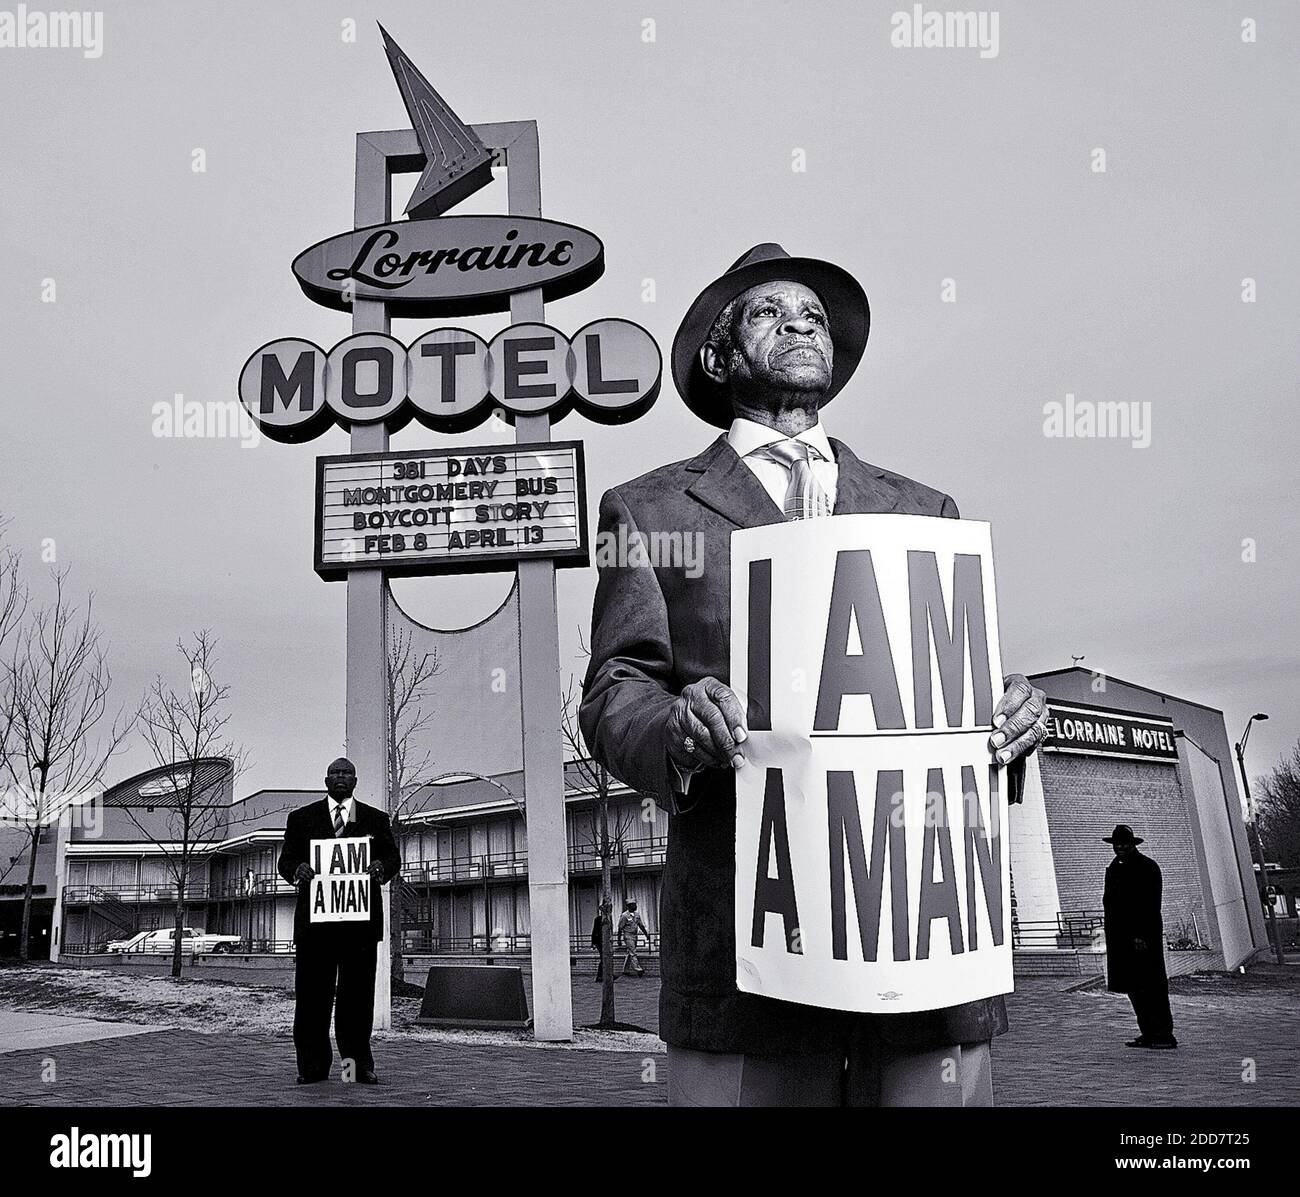 NO FILM, NO VIDEO, NO TV, NO DOCUMENTARY - Standing in front of the former Lorraine Motel, the site of Martin Luther King, Jr. assassination on April 4, 1968, Memphis sanitation workers Elmore Nickelberry, 76, center, and his son, Terrence, left, hold a replica of the placard used by strikers in Memphis, TN, USA, on March 25, 2008. Photo by Carl Juste/Miami Herald/MCT/ABACAPRES.COM Stock Photo